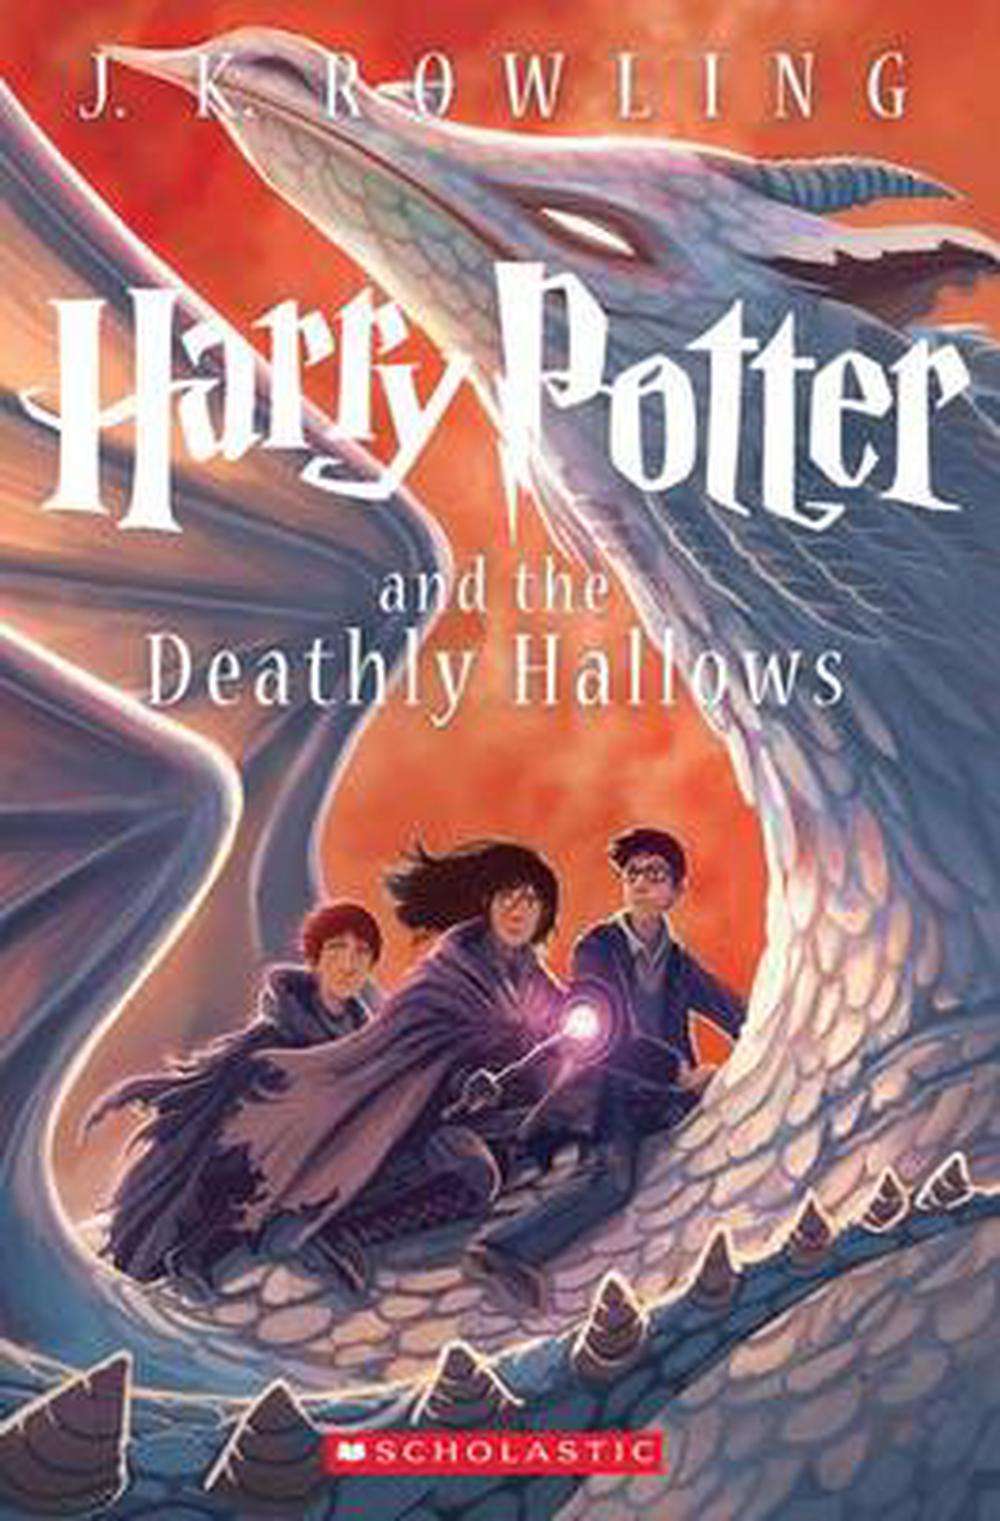 Harry Potter and the Deathly Hallows by J.K. Rowling, Paperback ...